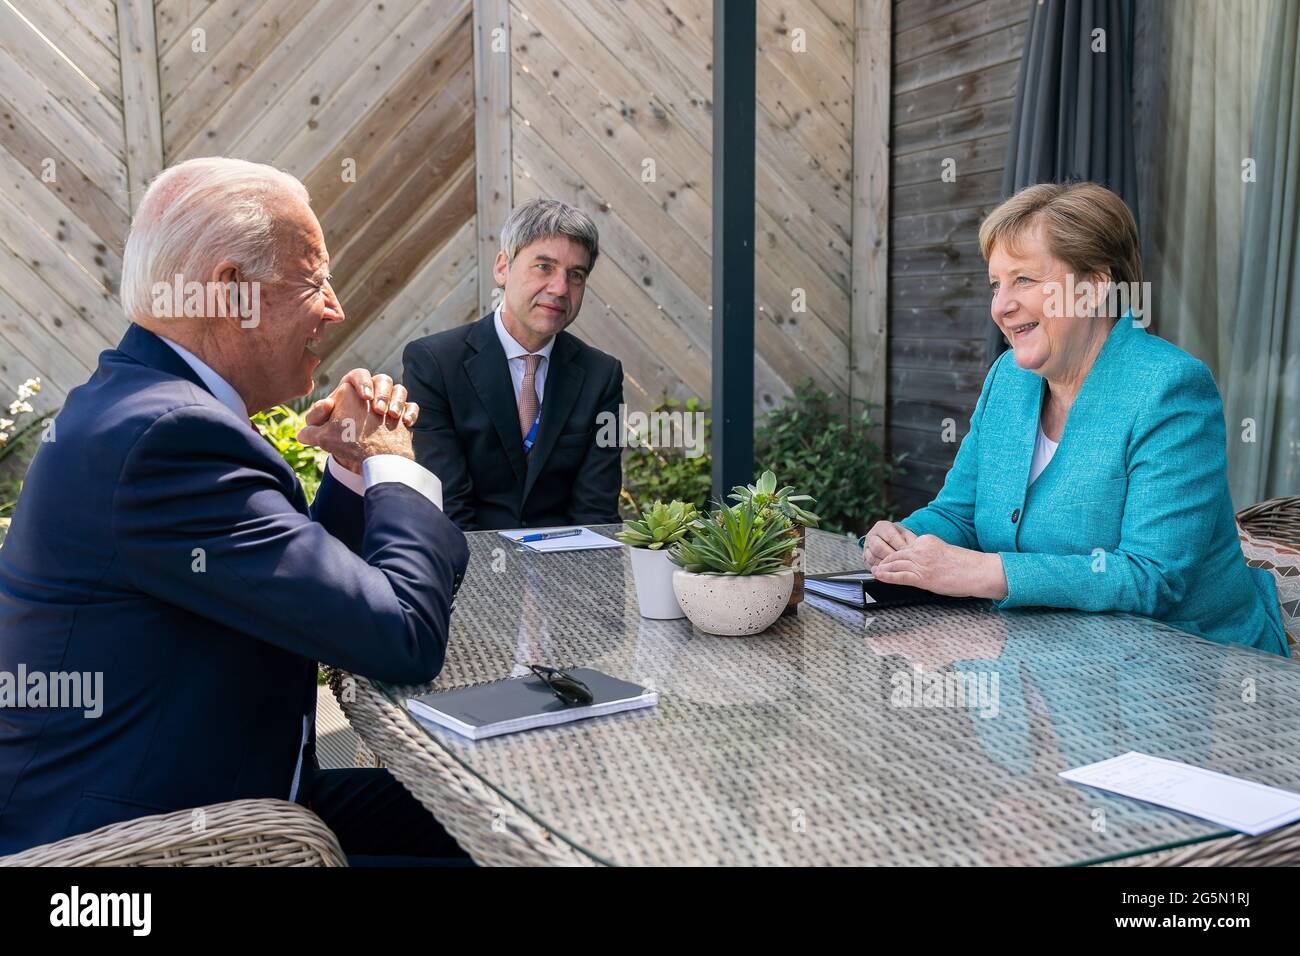 President Joe Biden meets for a brief pull-aside meeting with German Chancellor Angela Markel during the G7 Summit at the Carbis Bay Hotel and Estate on Saturday, June 12, 2021, in St. Ives, Cornwall, England. (Official White House Photo by Adam Schultz) Stock Photo